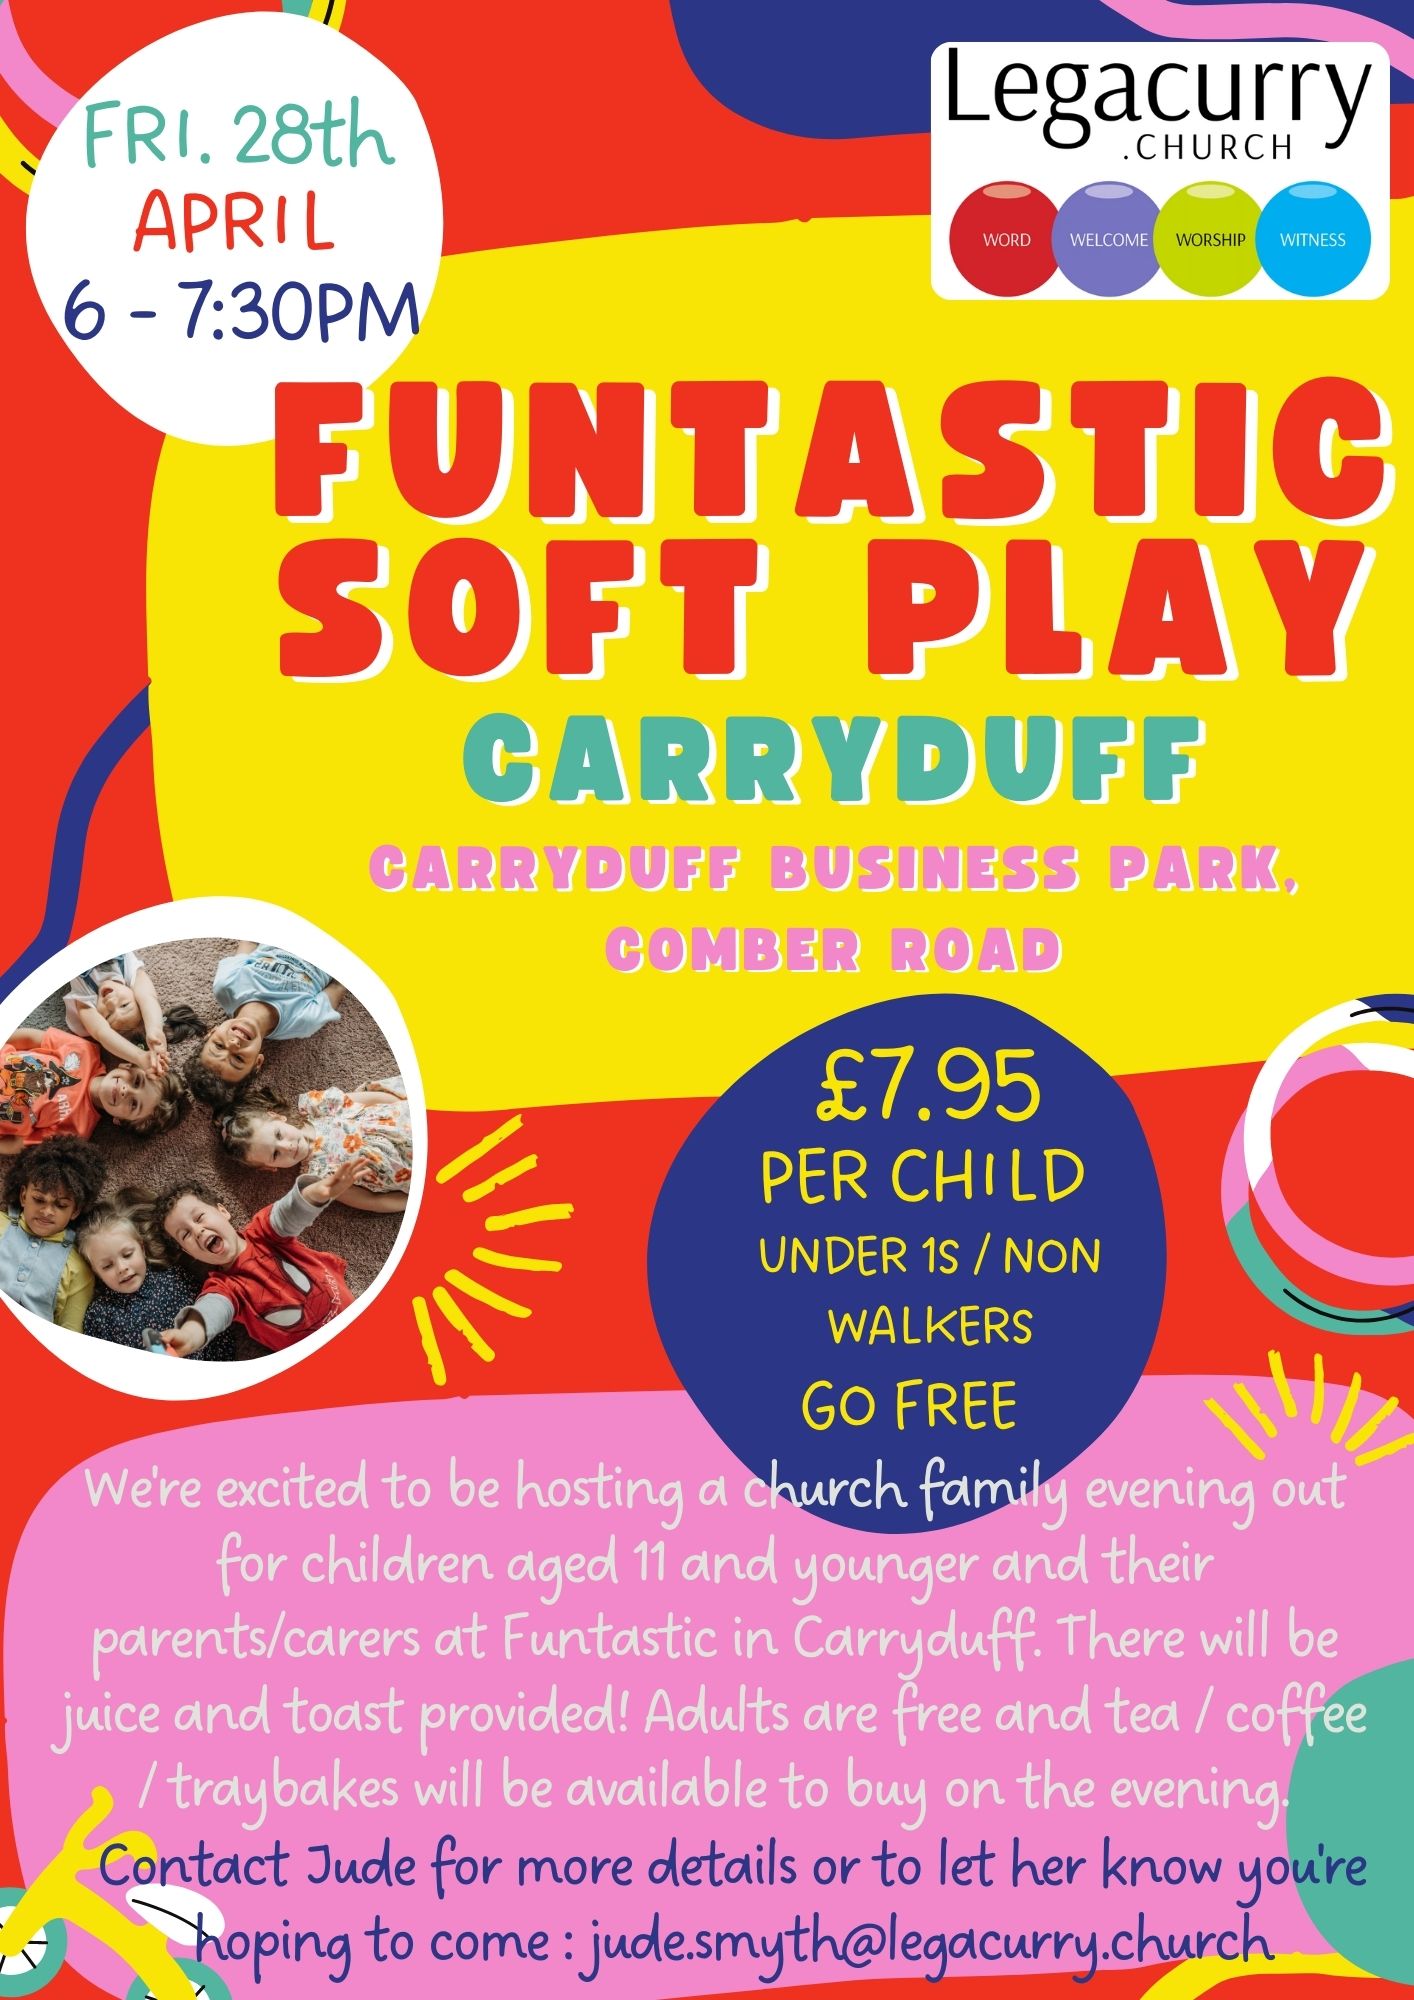 Flyer for Funtastic Soft Play at Carryduff